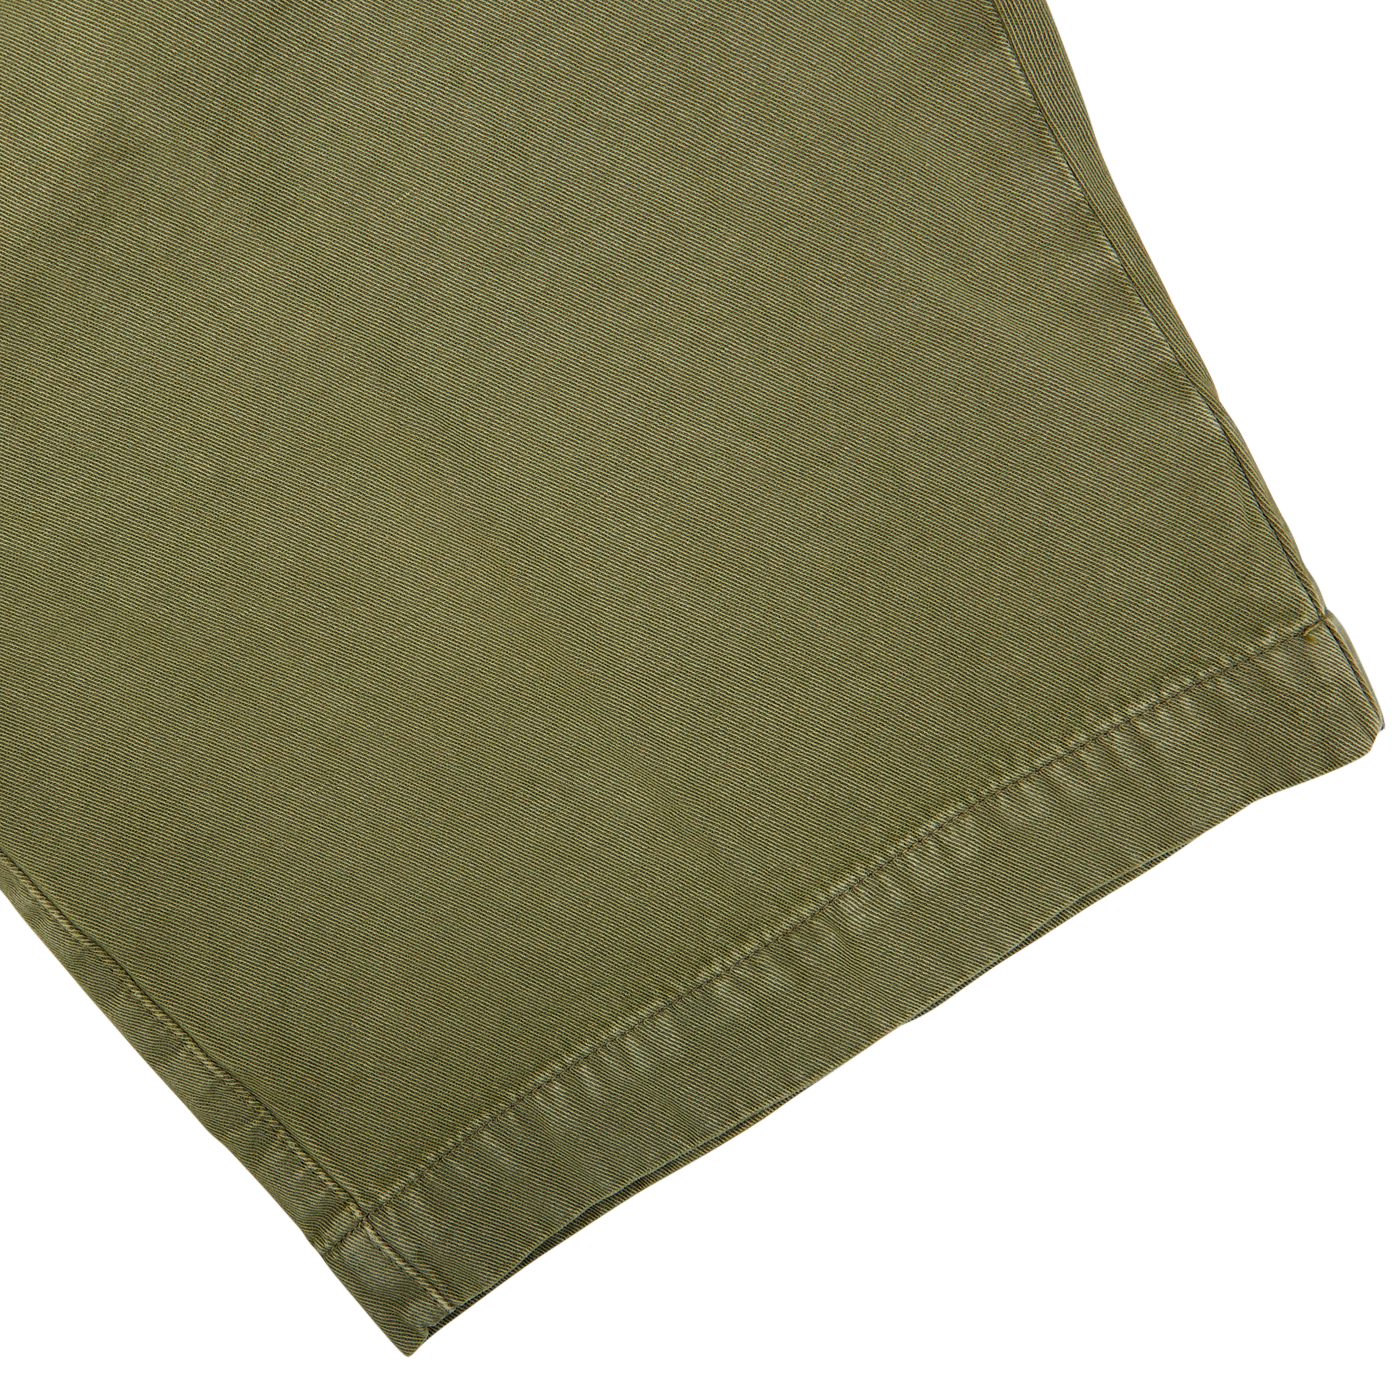 Grass Green Cotton Linen Pleated Shorts by Briglia, with a stitched hem and an adjustable waistband on a white background.